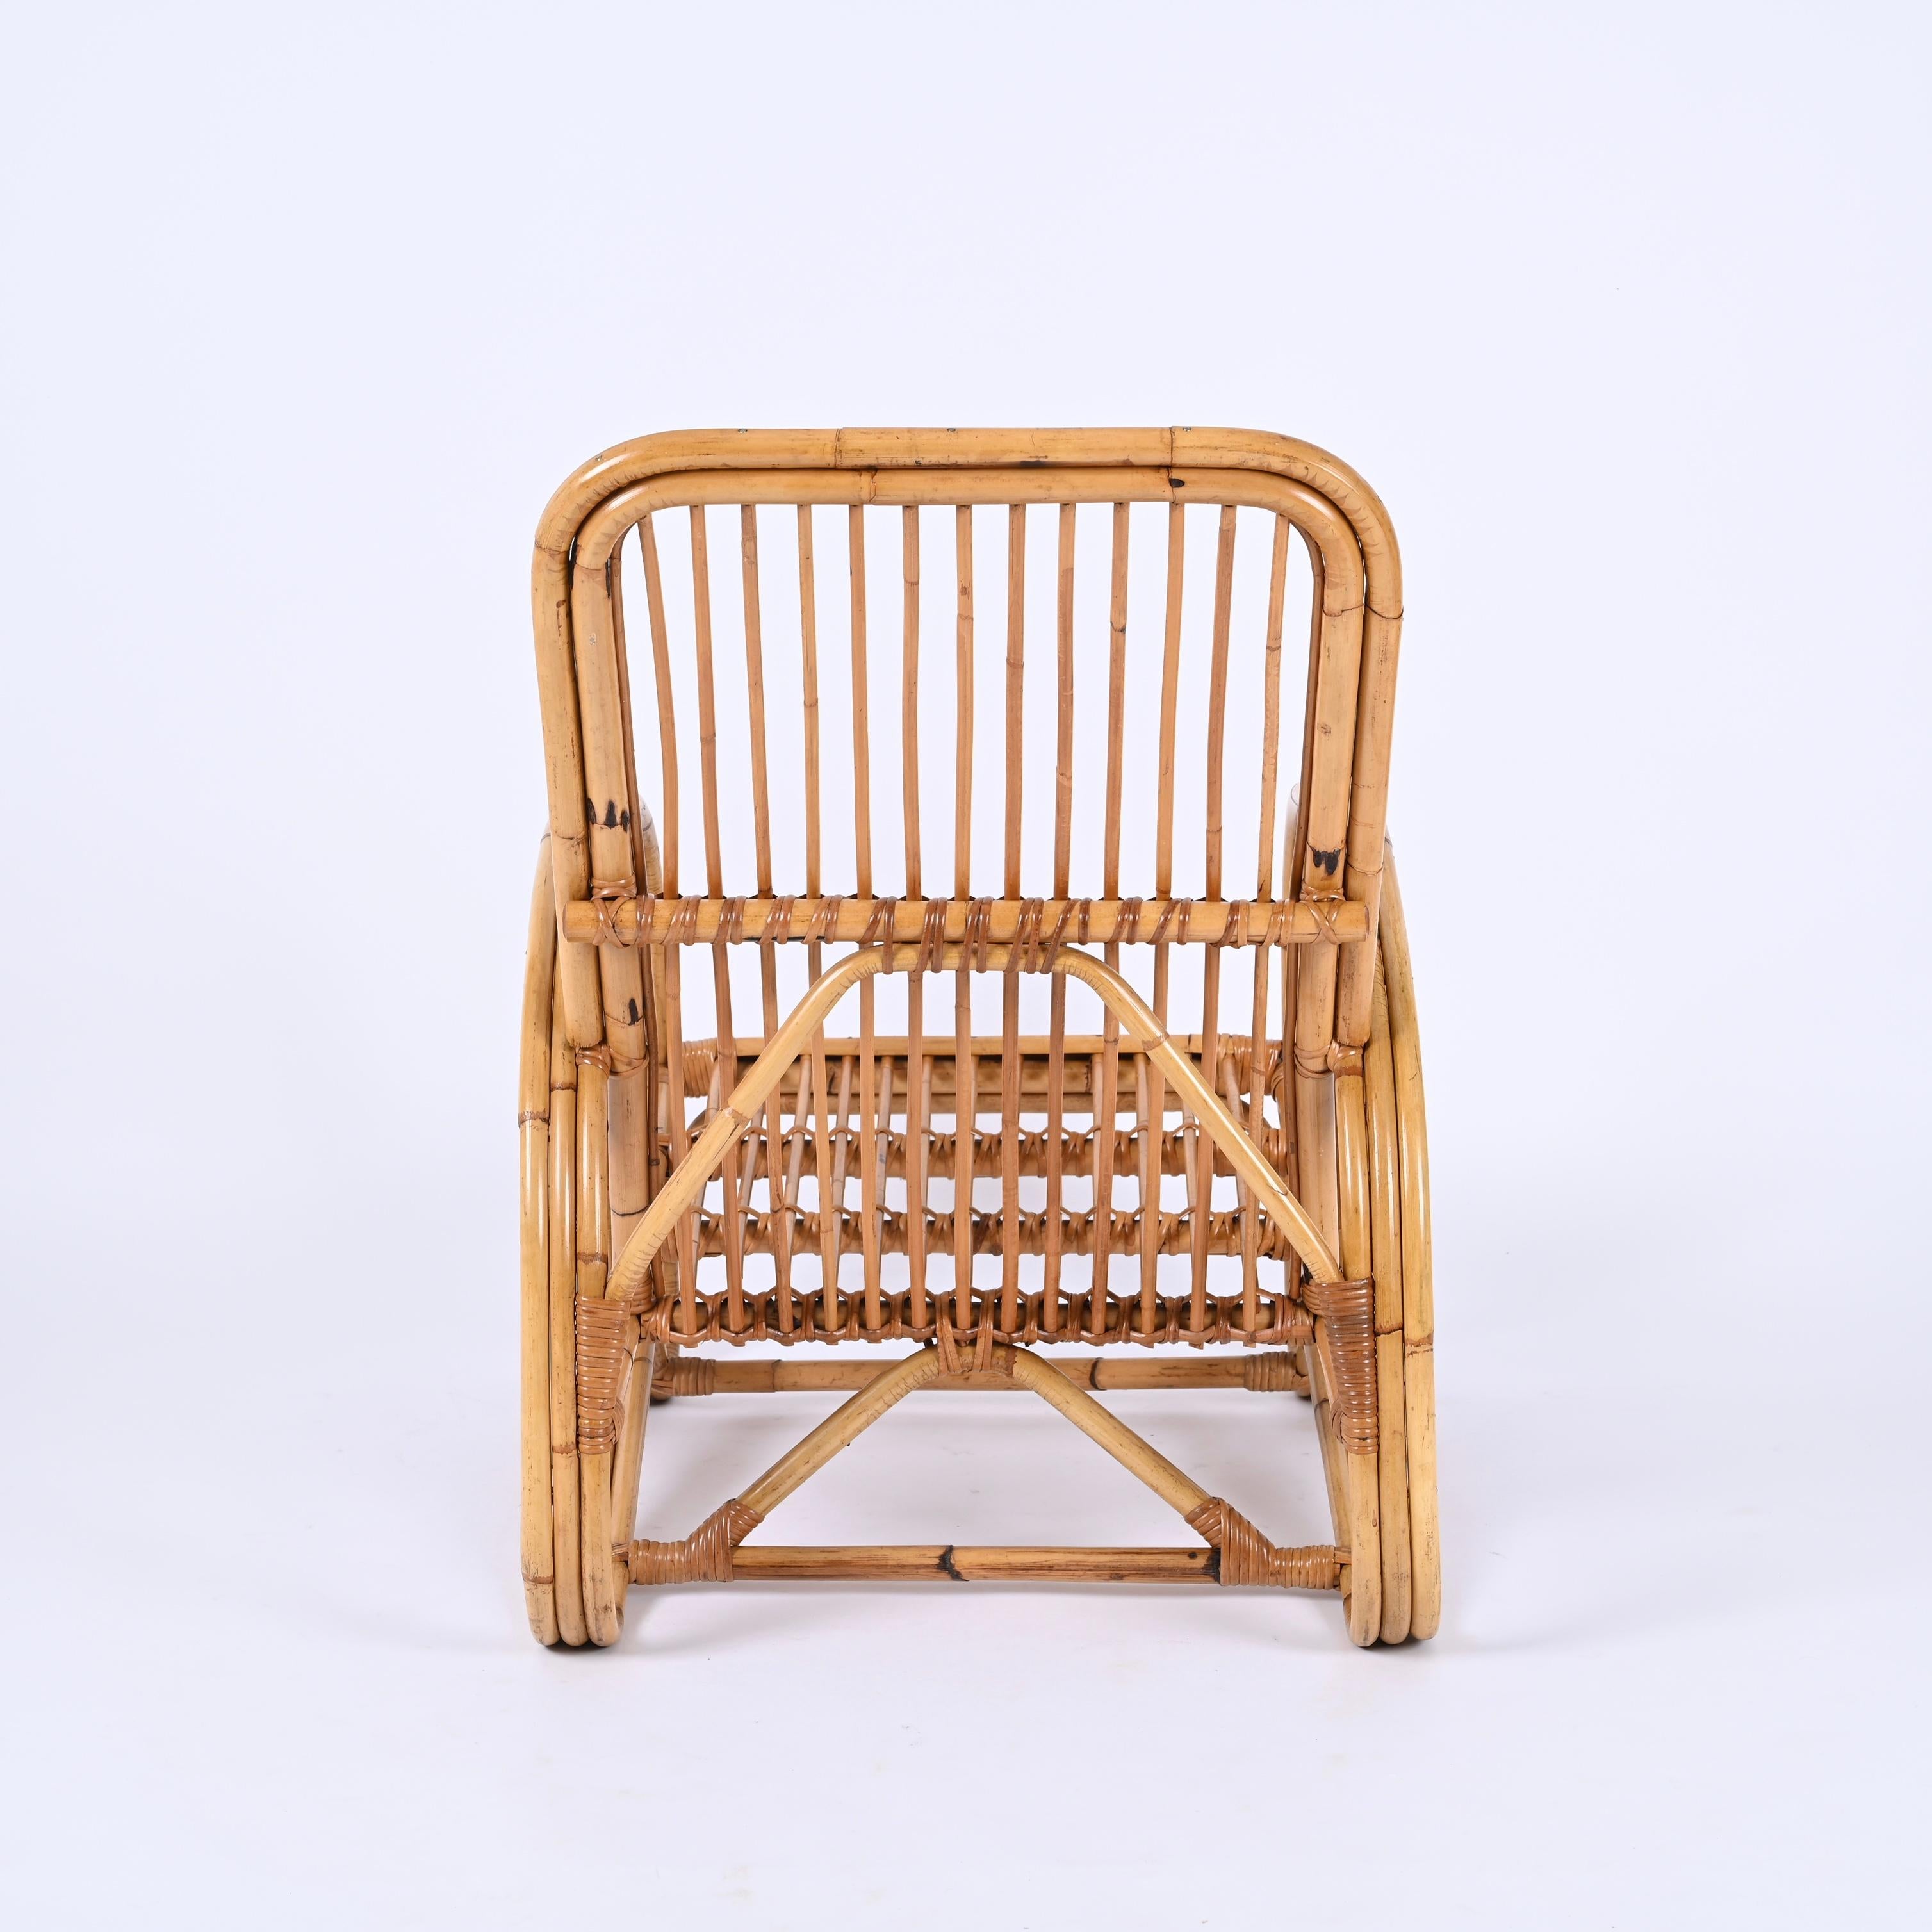 Vivai del Sud Mid-Century Italian Bamboo and Rattan Armchair, Italy 1970s For Sale 4